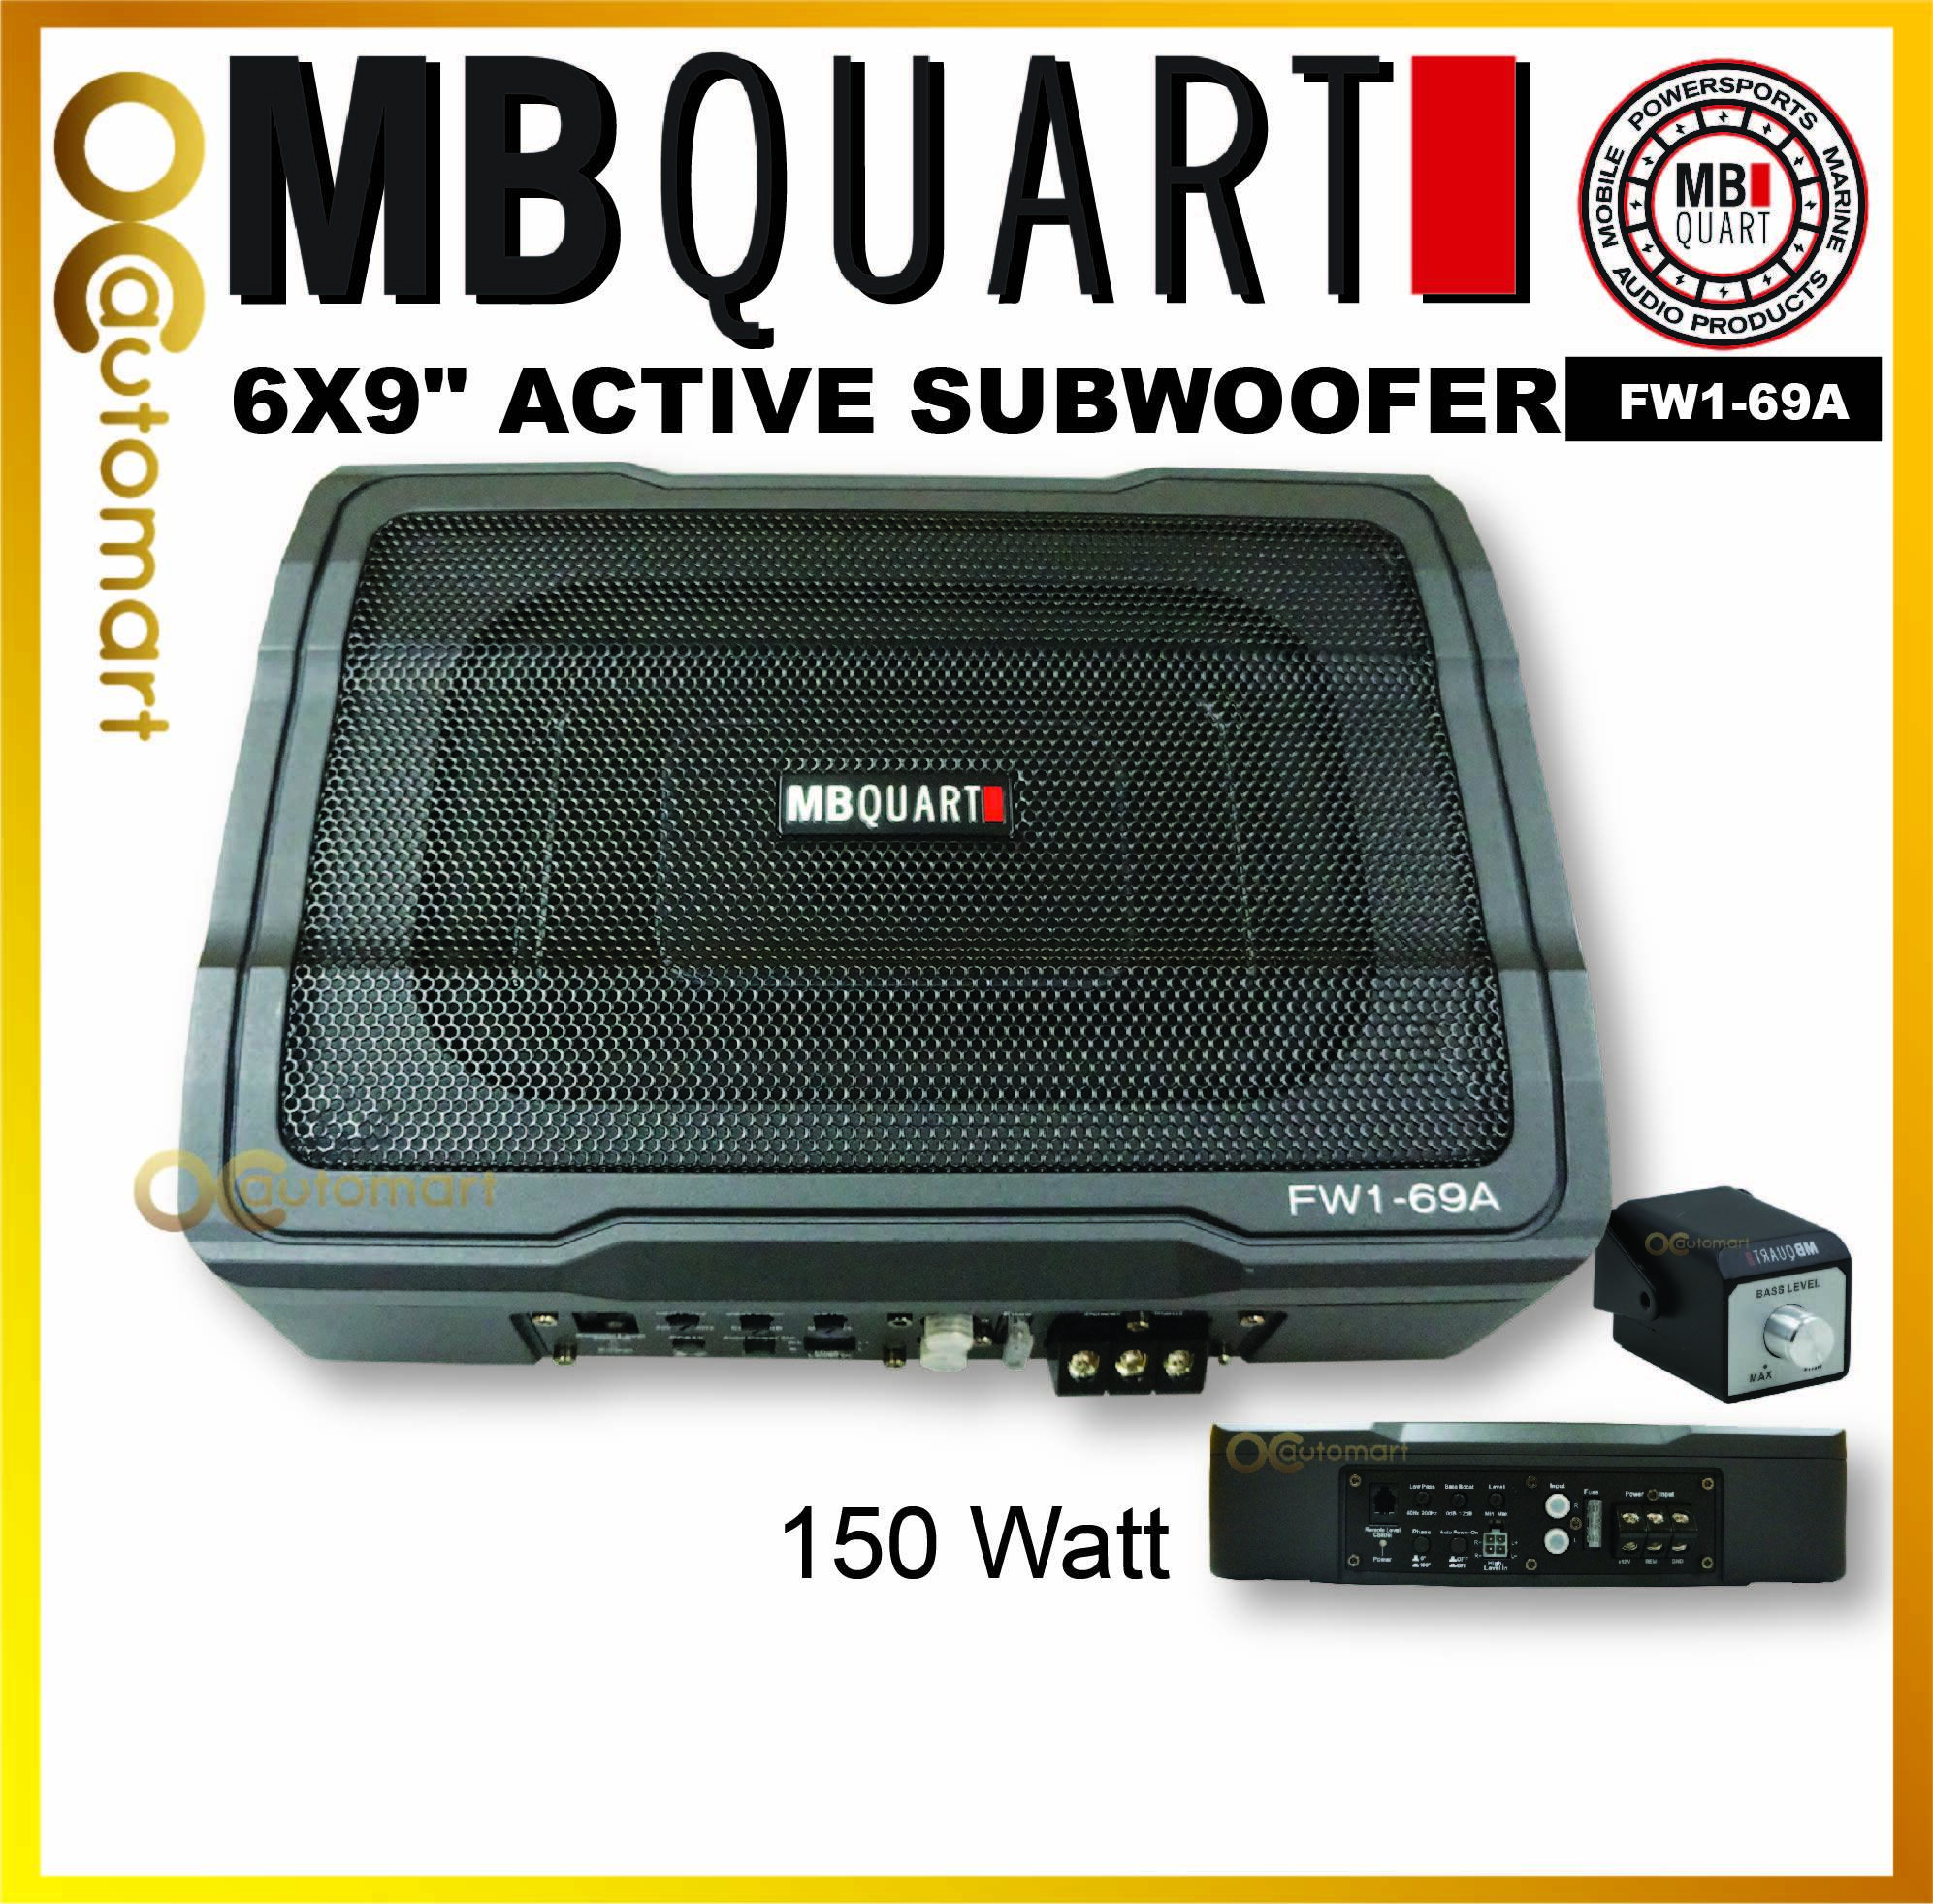 MB Quart 6" X 9" Active Subwoofer FW1-69A Underseat Woofer Under Seat Active Sub With Remote Control